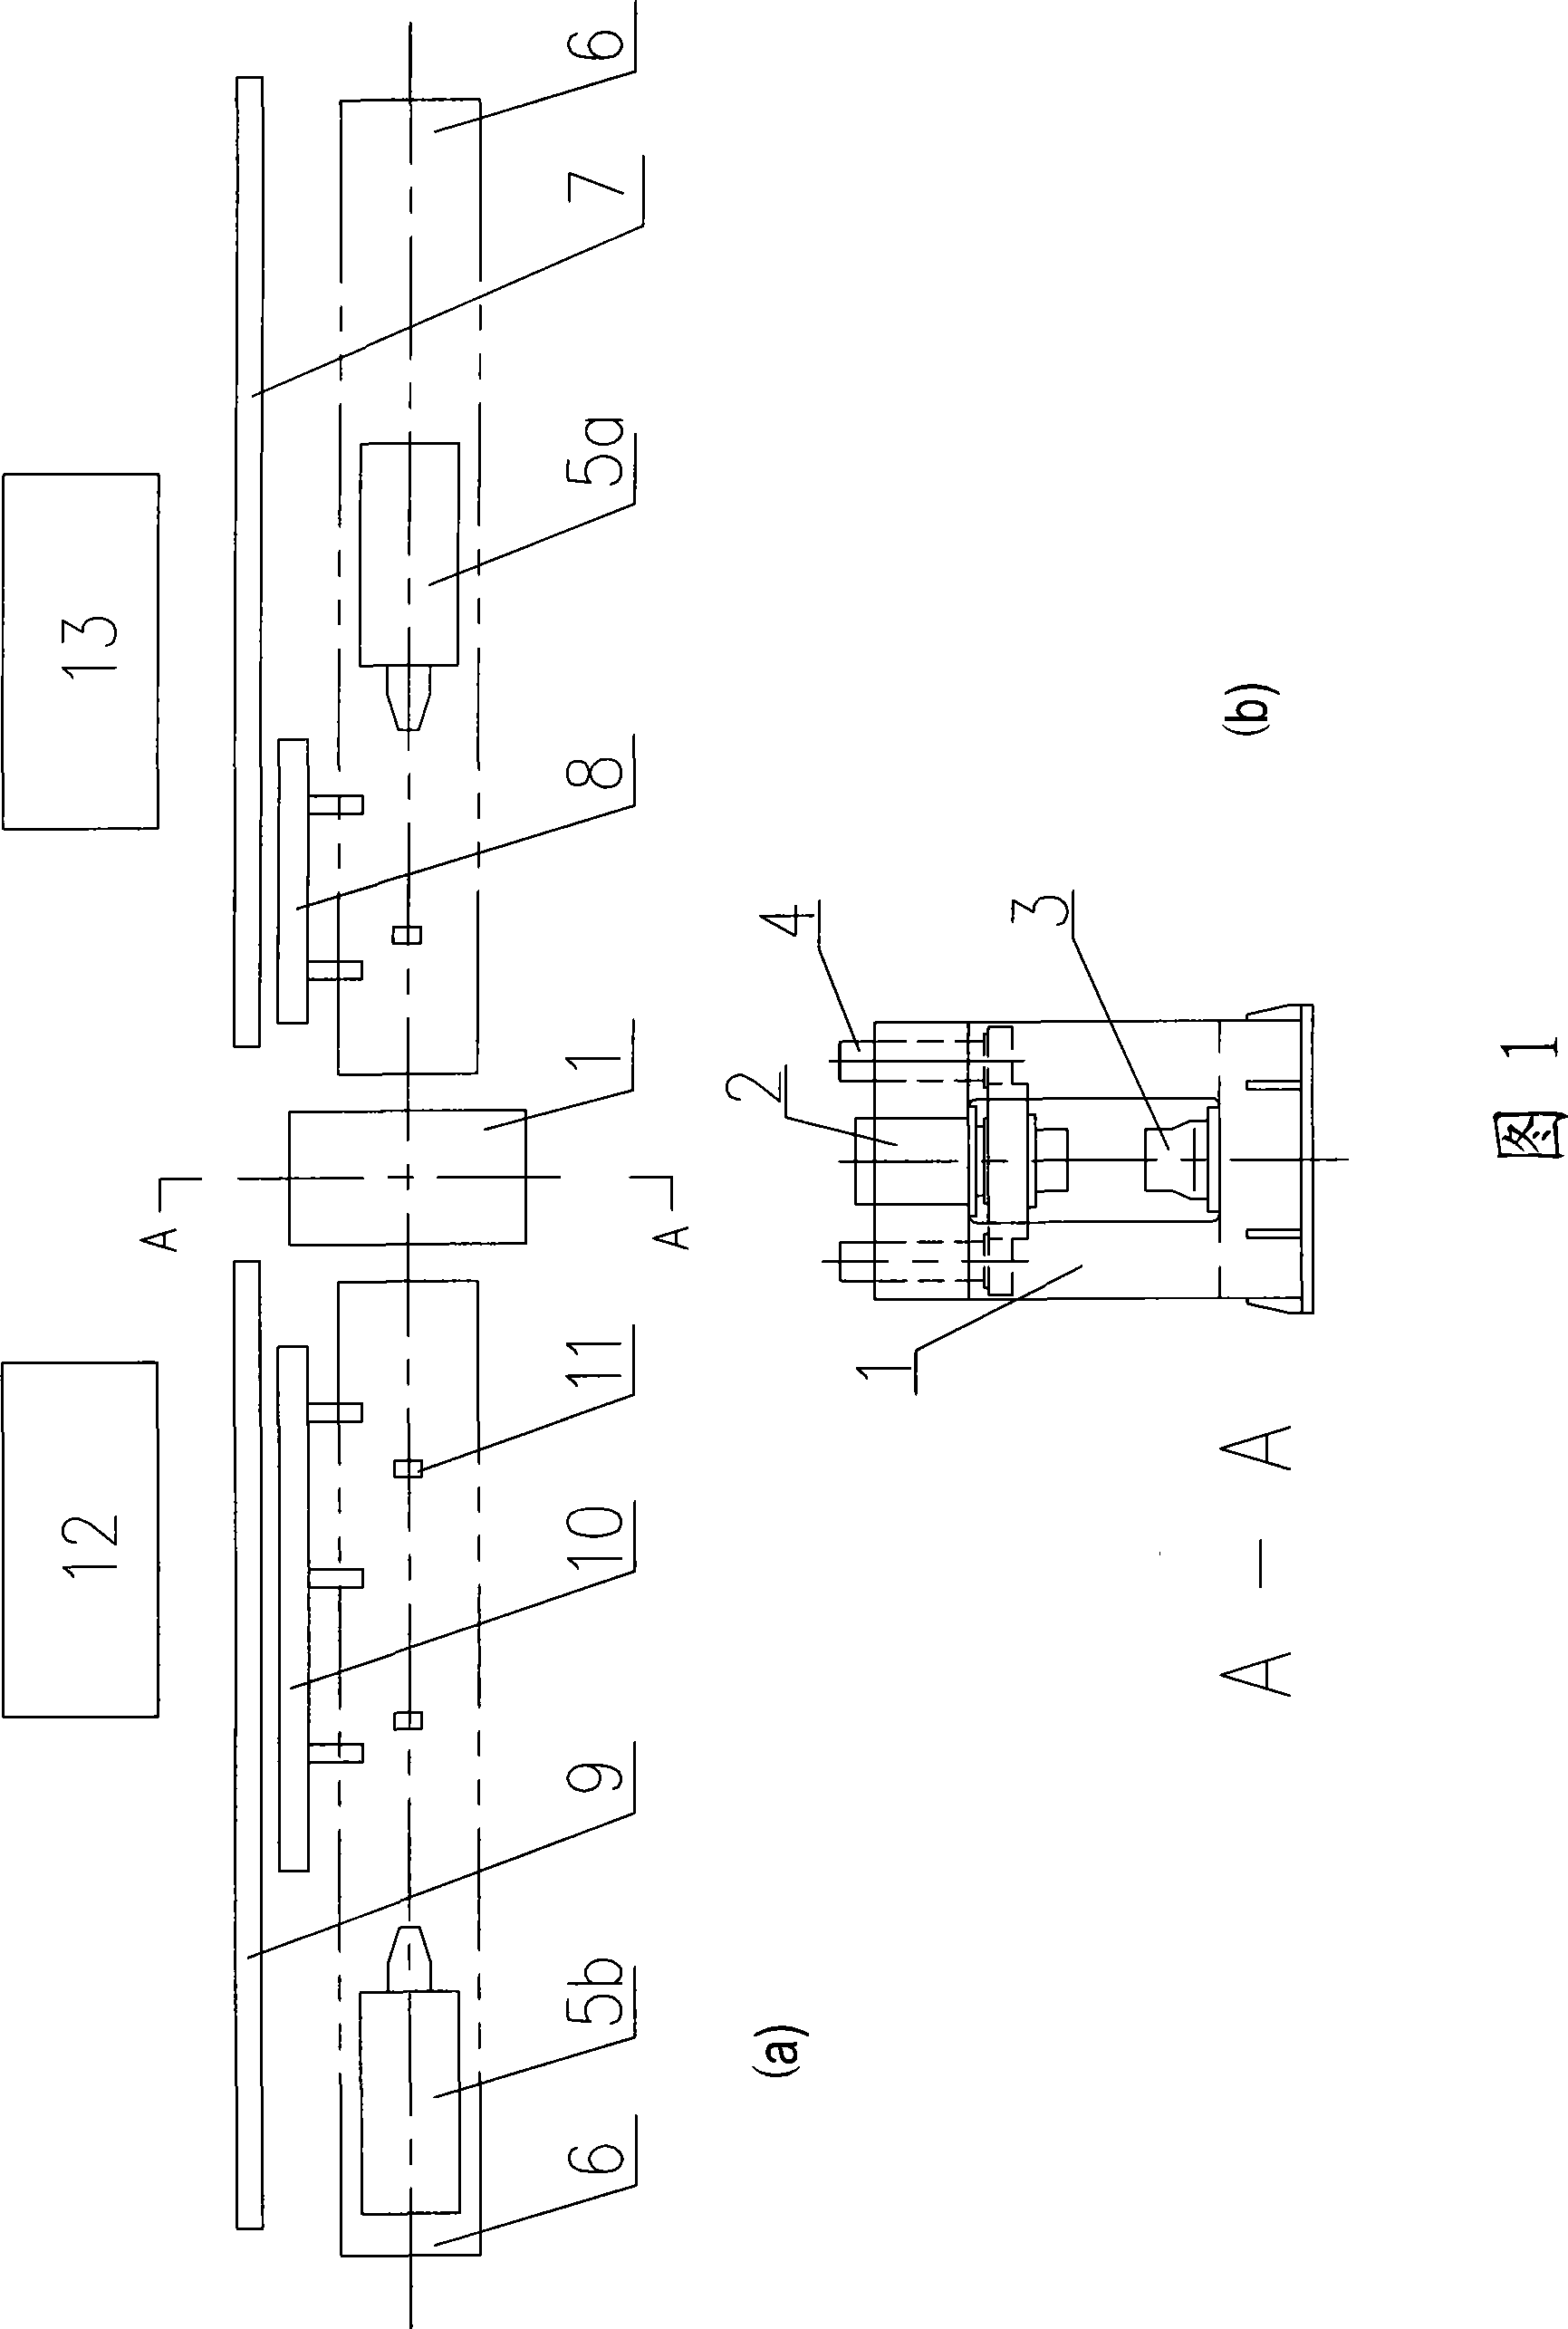 Special free-forging hydraulic unit and use method thereof